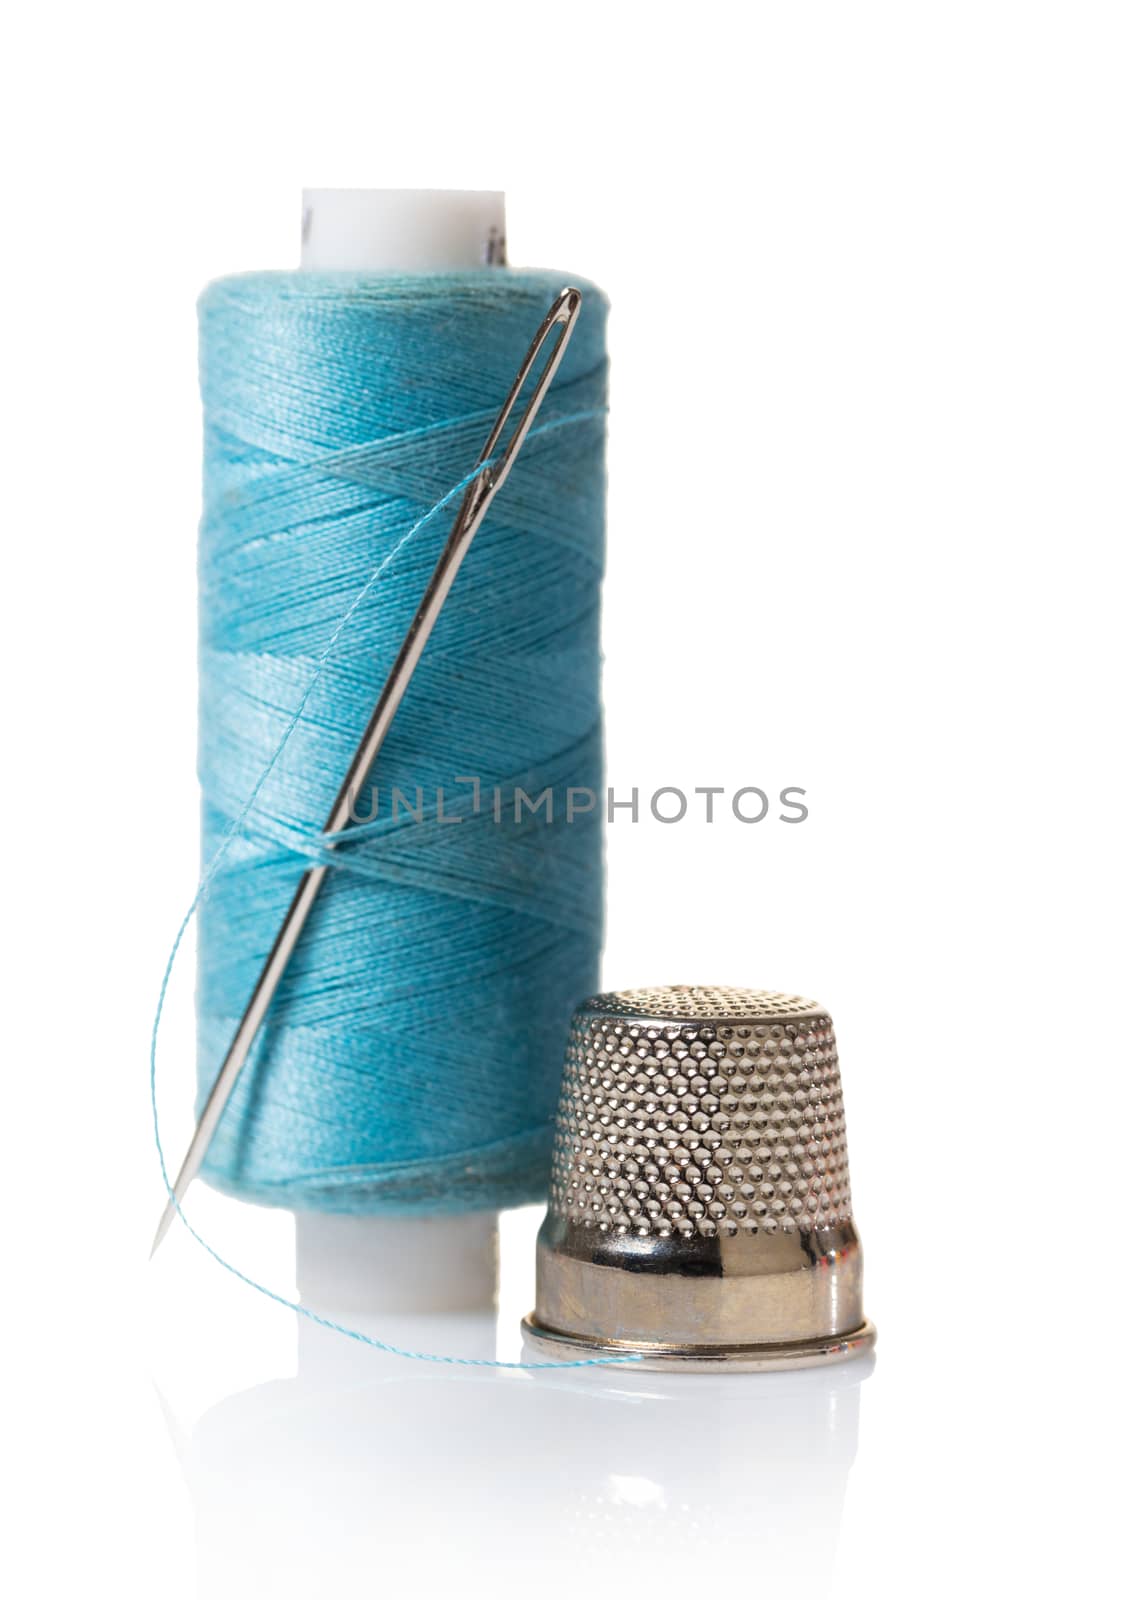 Thread with needle and thimble  by MegaArt